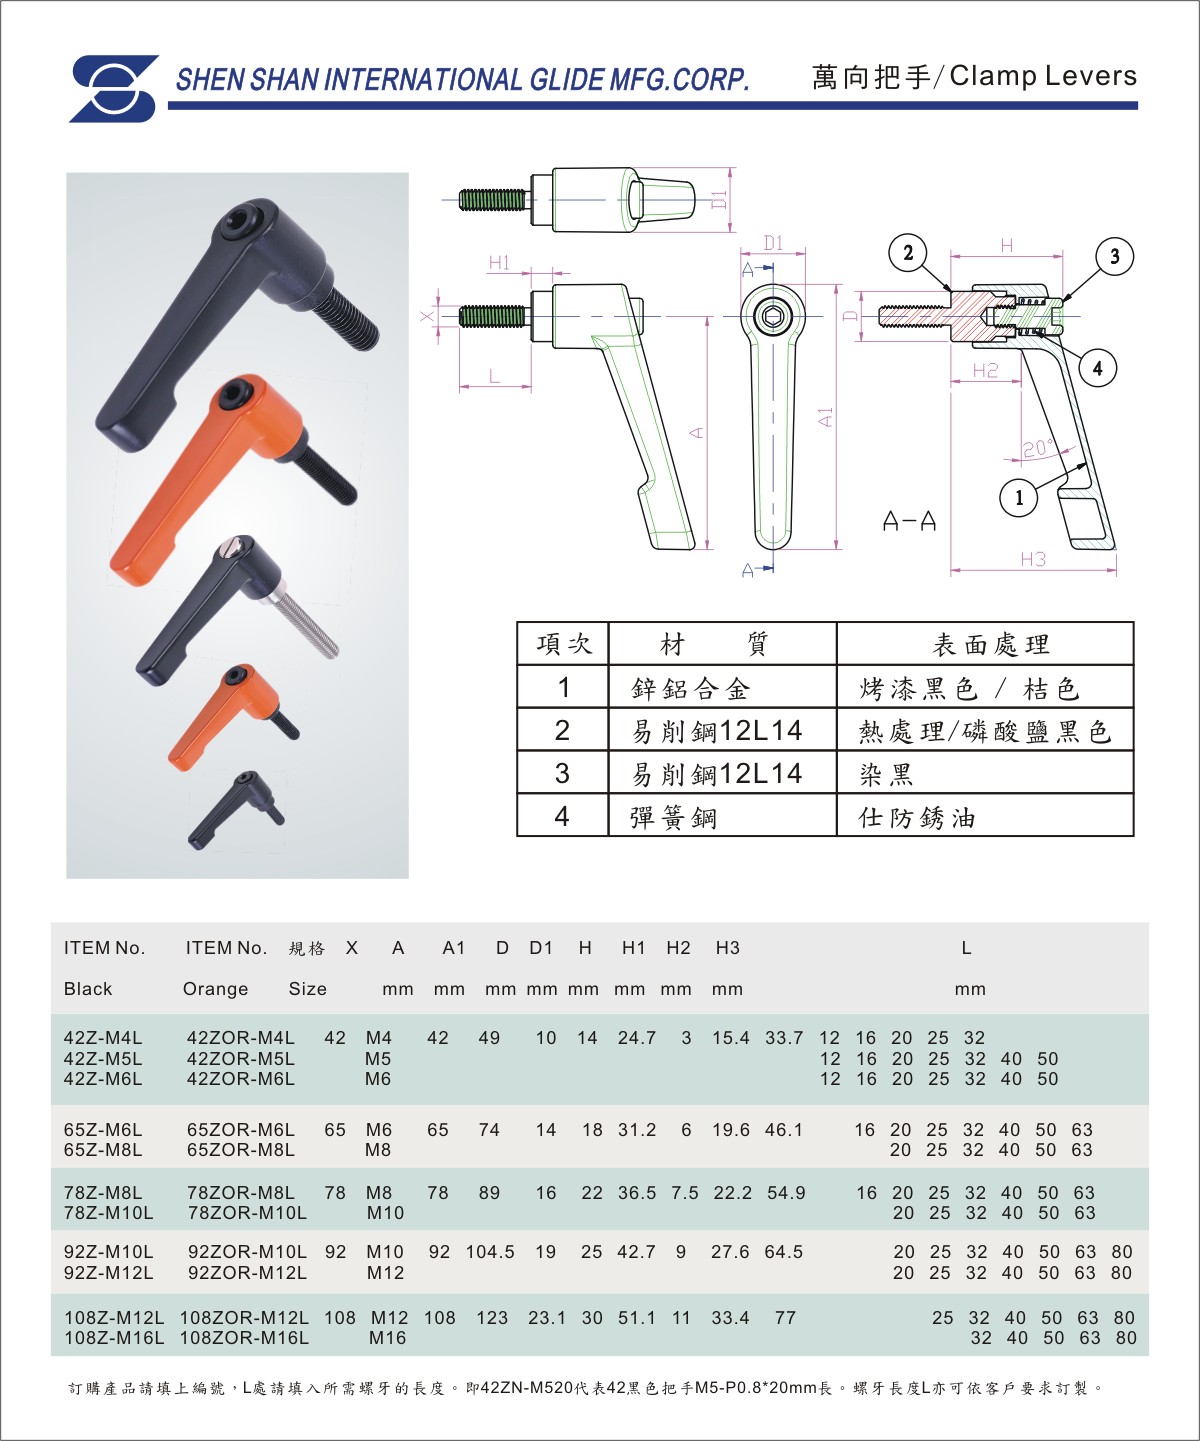 Clamp Levers